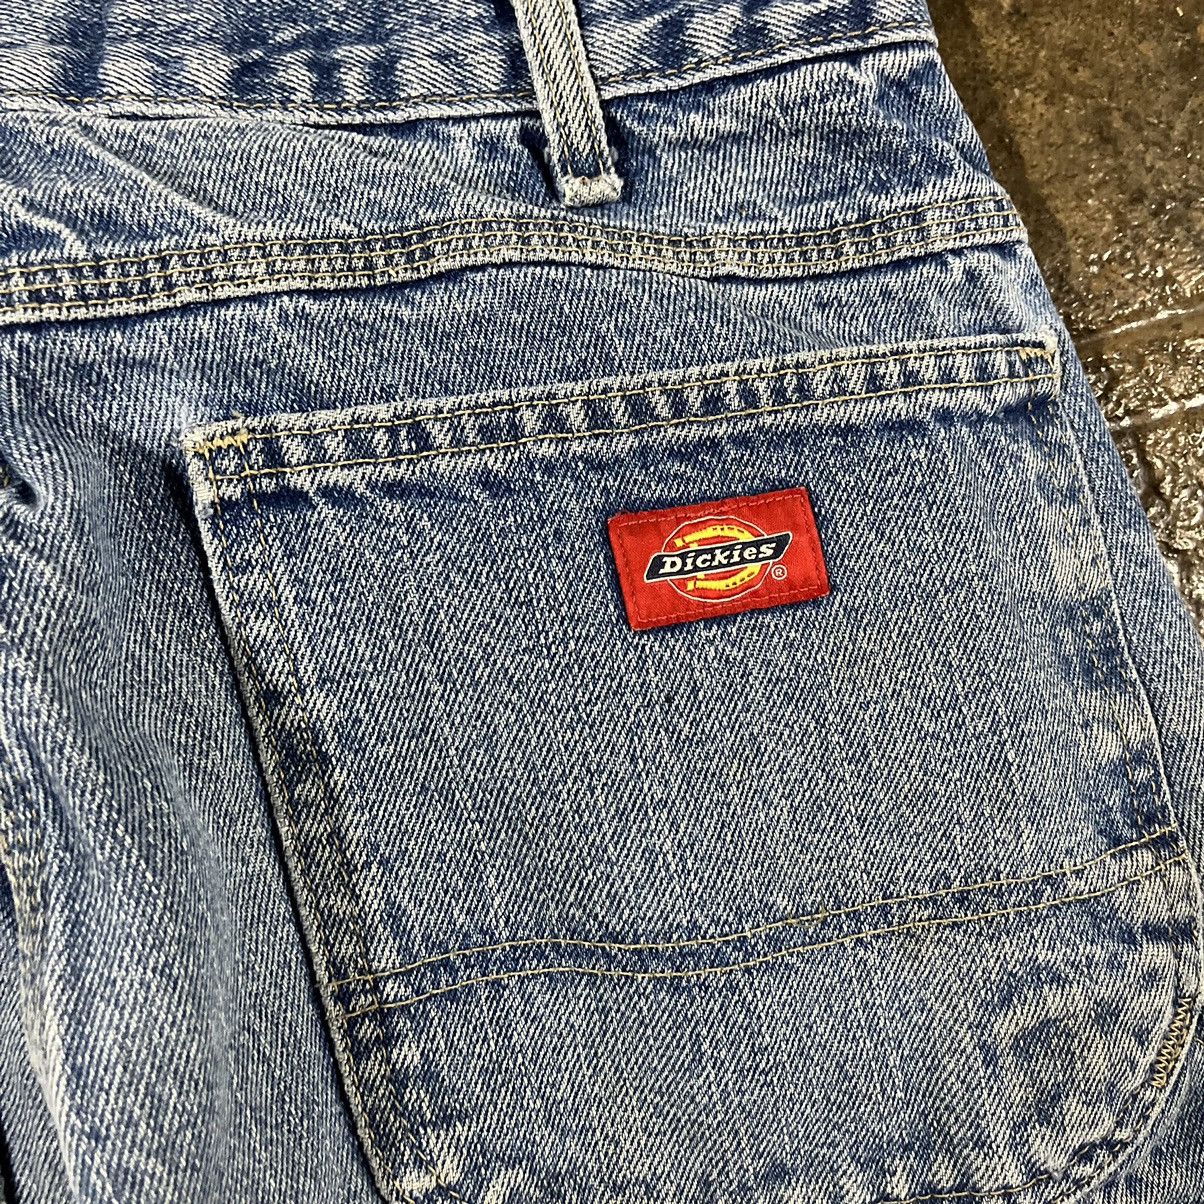 Vintage Crazy Dickies Double Knee Carpenter Jeans Workwear Skater Size US 34 / EU 50 - 10 Preview